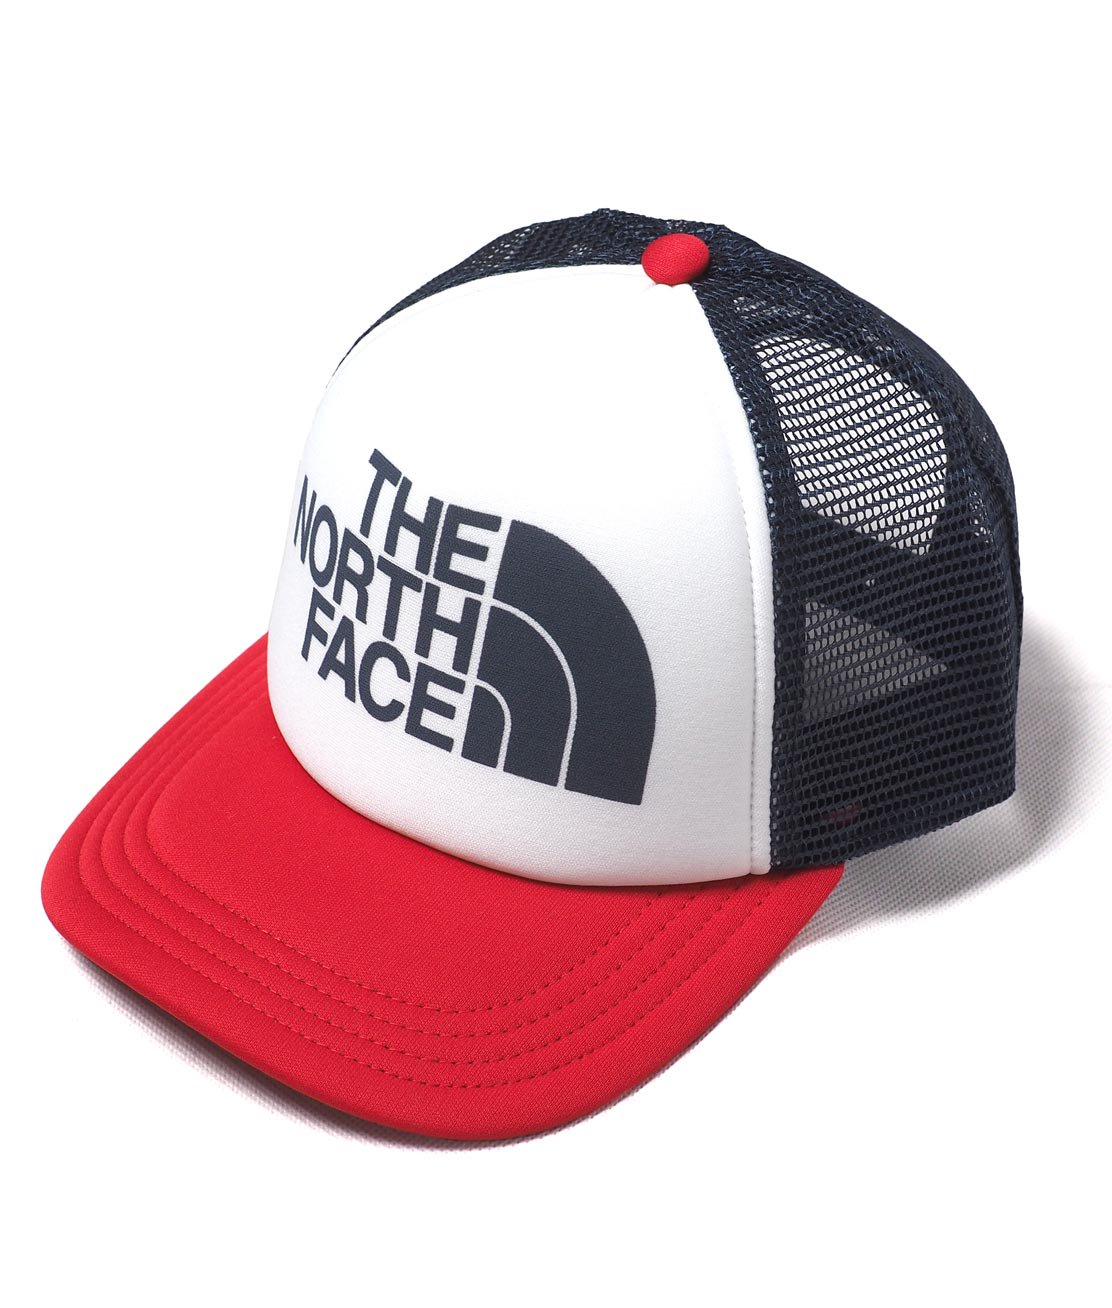 The North Face Youth Photobomb Mesh Cap Wht Red メッシュキャップ Hunky Dory